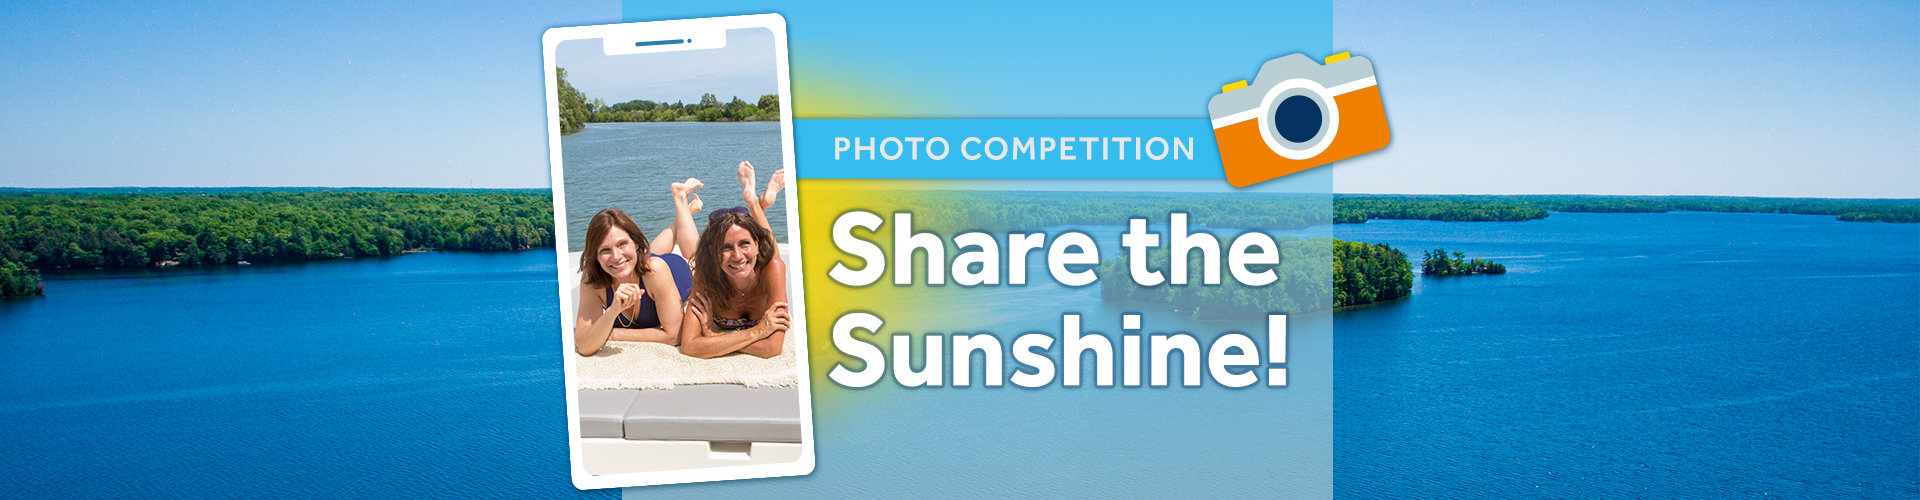 Share the sunshine - photo competition